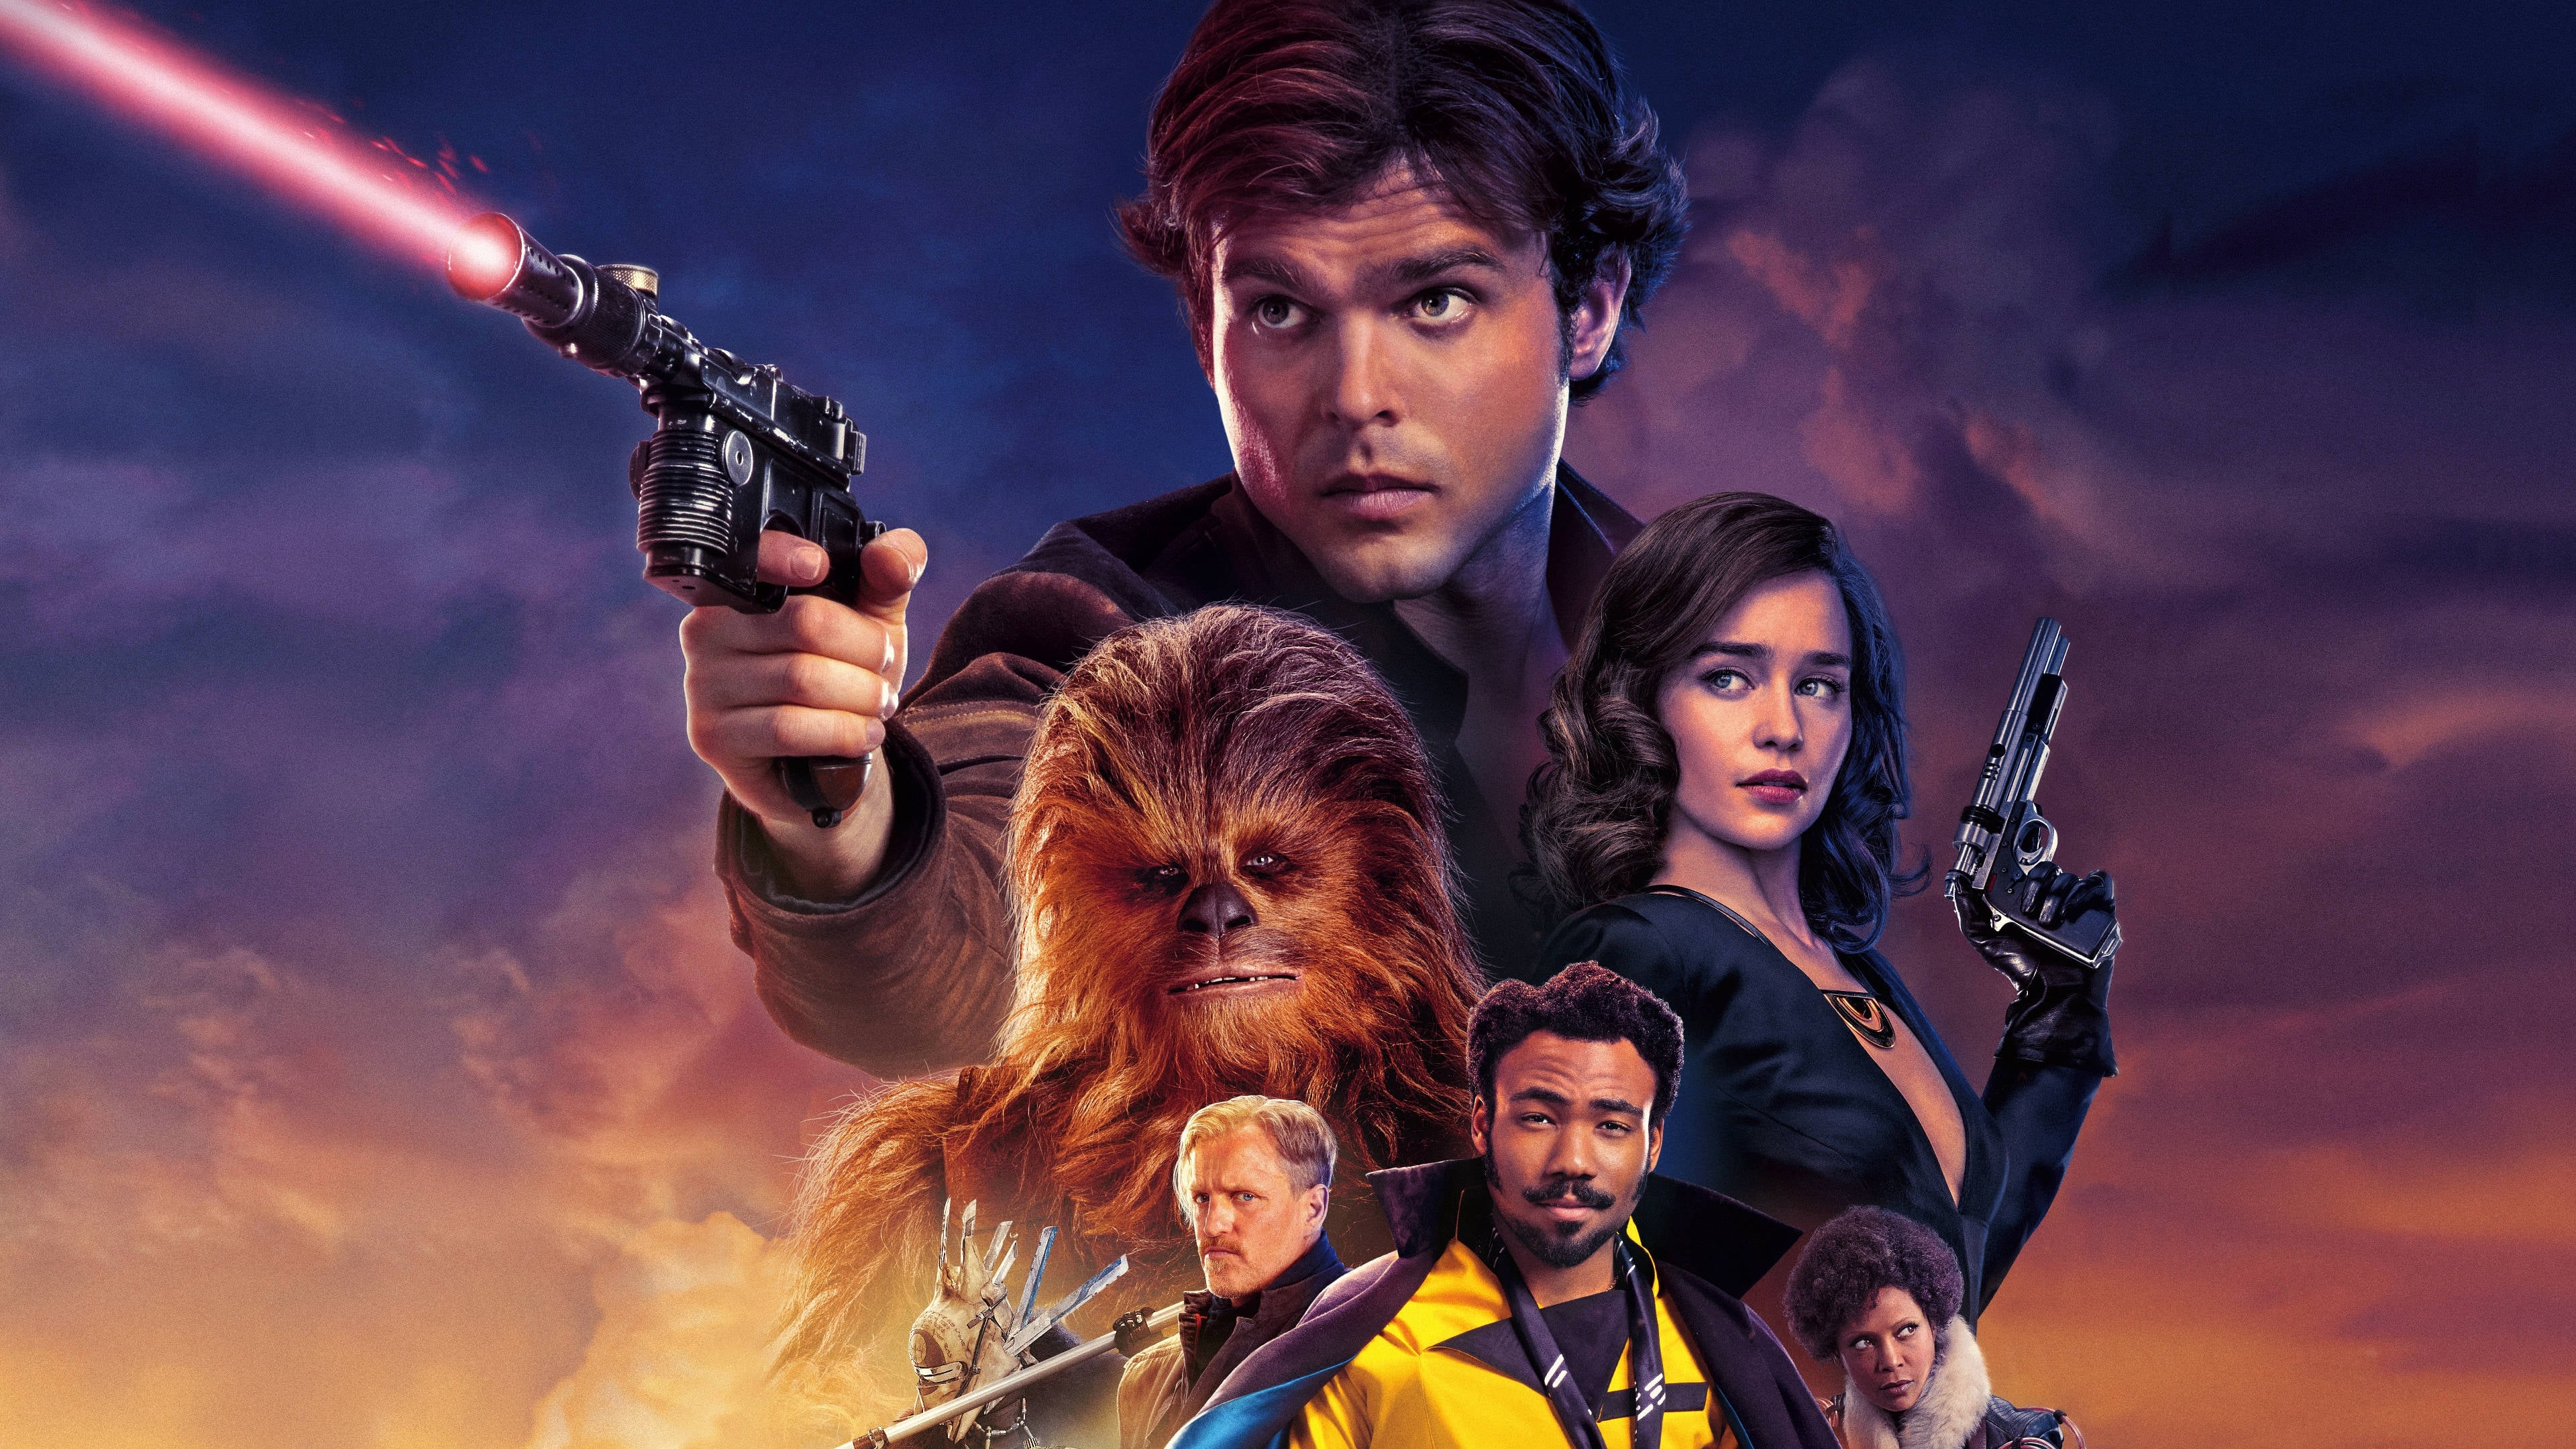 Is Solo a Star Wars story worth it?